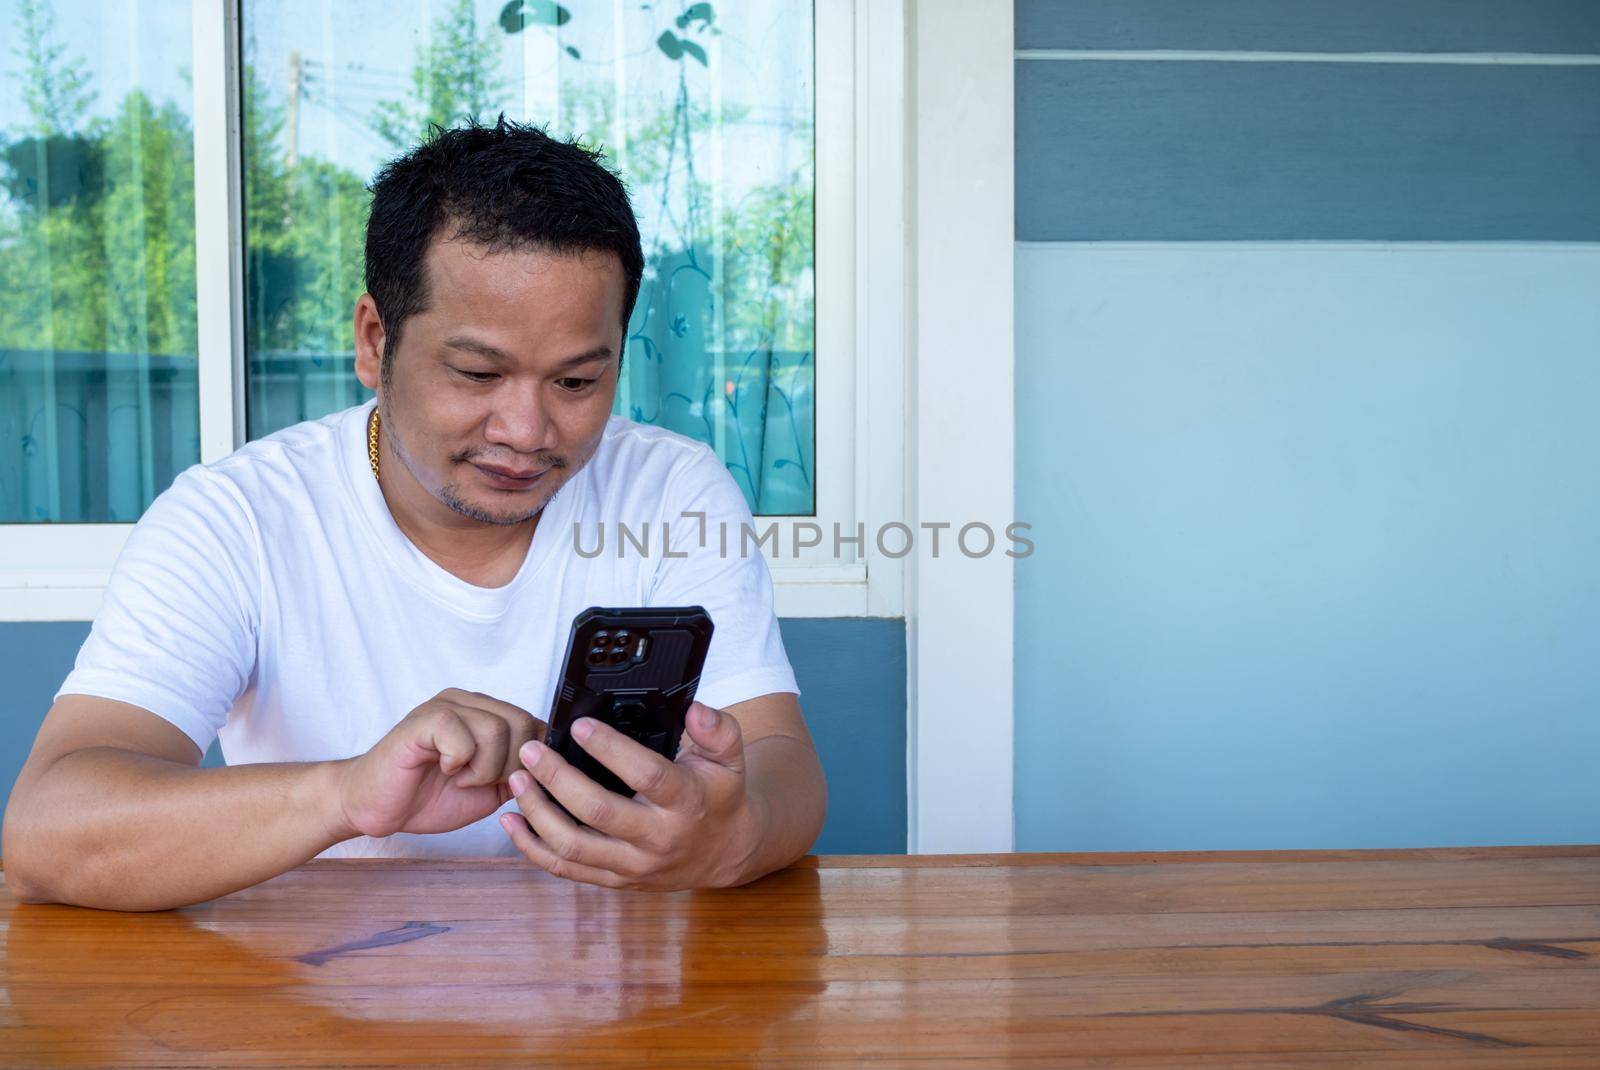 Asian man wearing white shirt using the phone on a wooden table